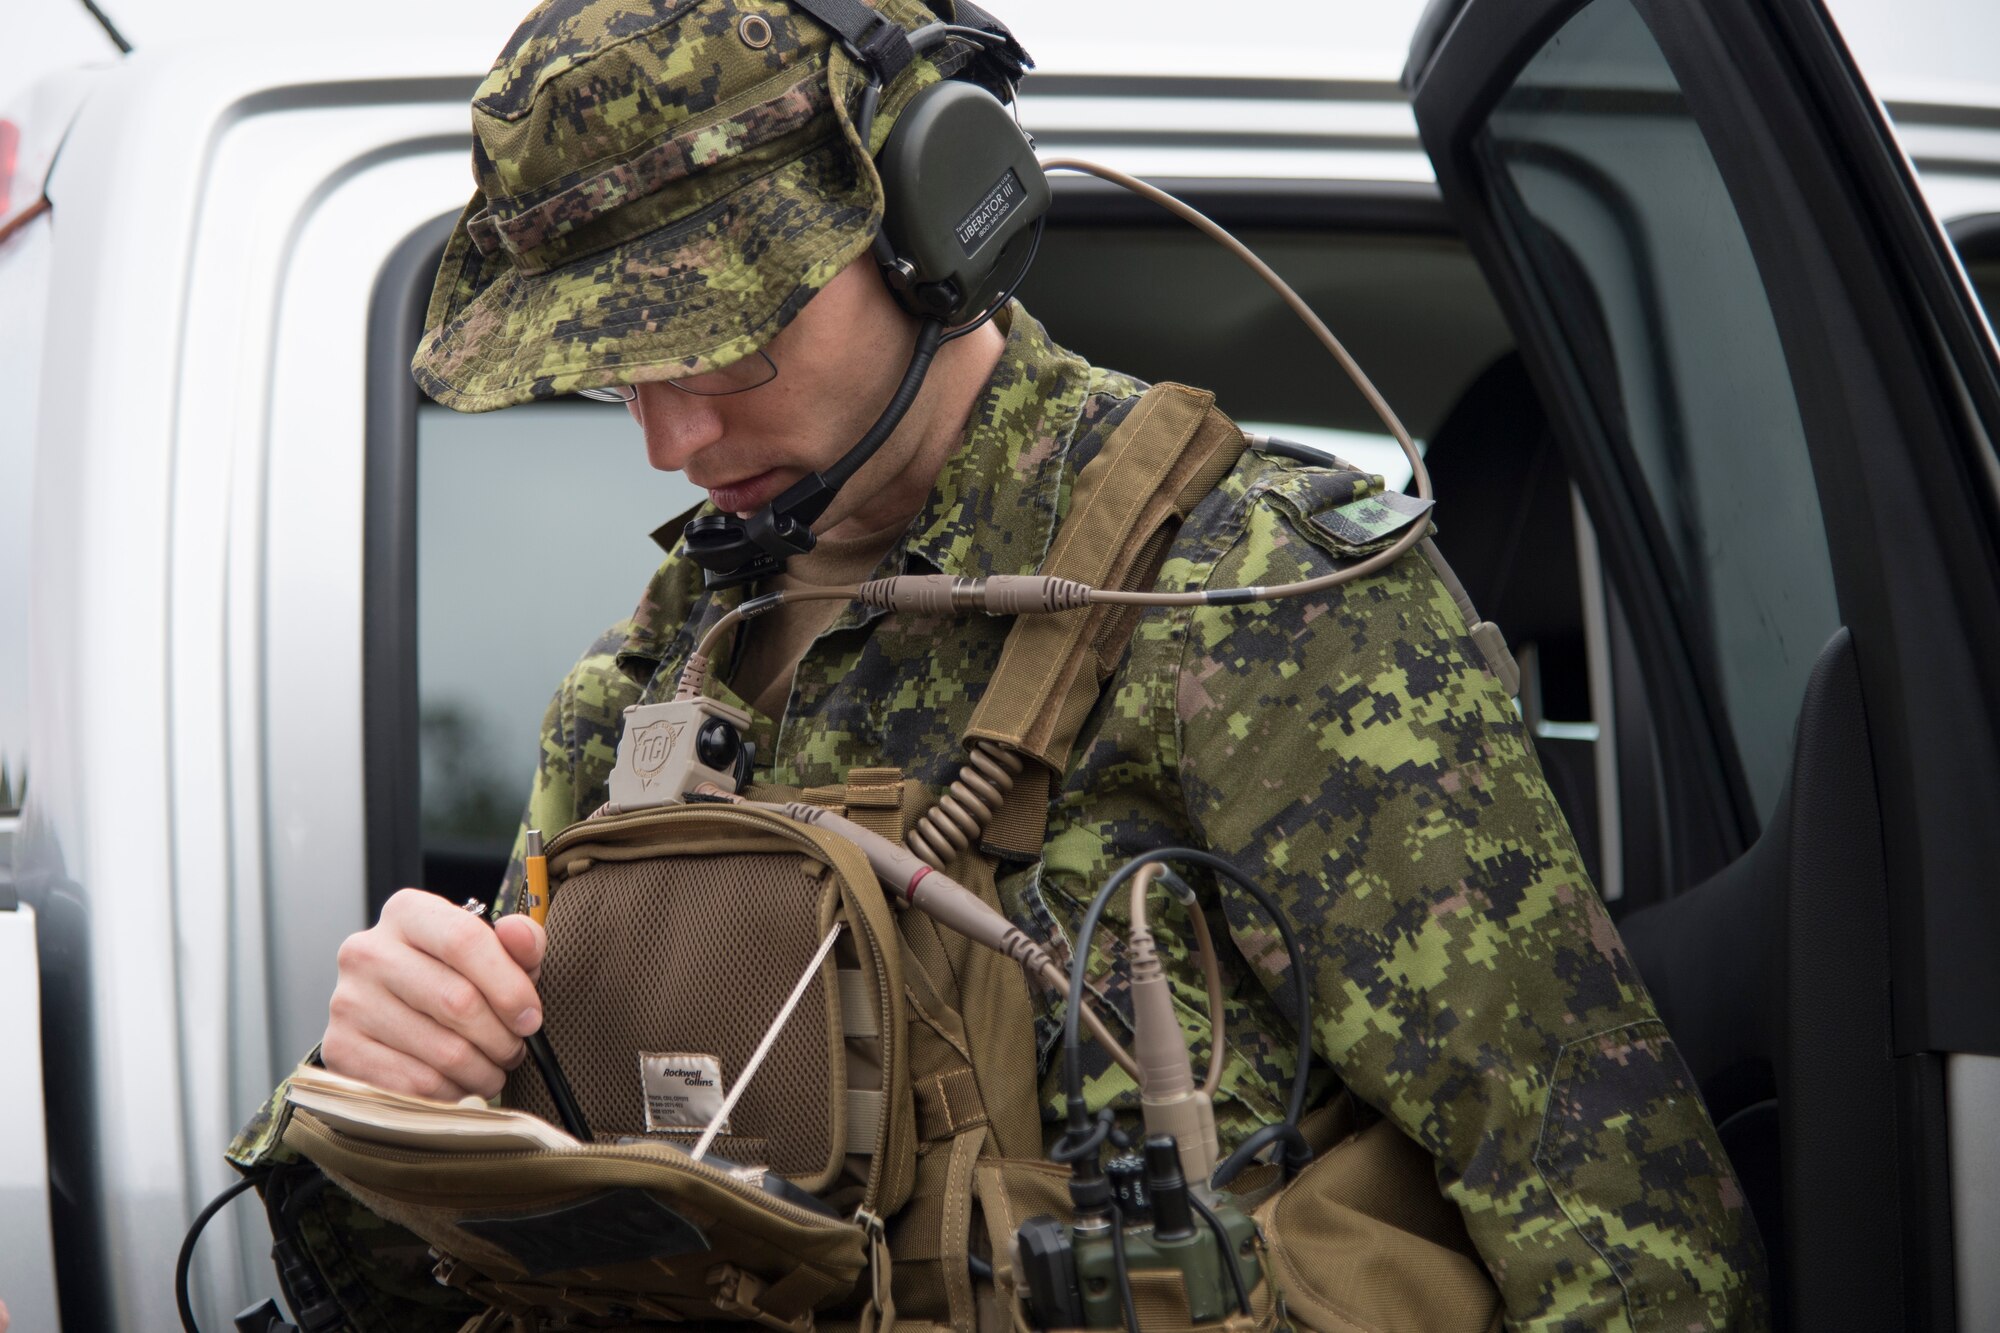 Canadian Royal Air Force Warrant Officer Macintyre, joint terminal attack controller, uses a device to confirm coordinates during combined training, Feb. 20, 2018, in Lakeland, Ga. Ally forces from the CRAF and New Zealand army traveled to Moody Air Force Base to train with the 75th Fighter Squadron on close air support. (U.S. Air Force photo by Staff Sgt. Eric Summers Jr.)